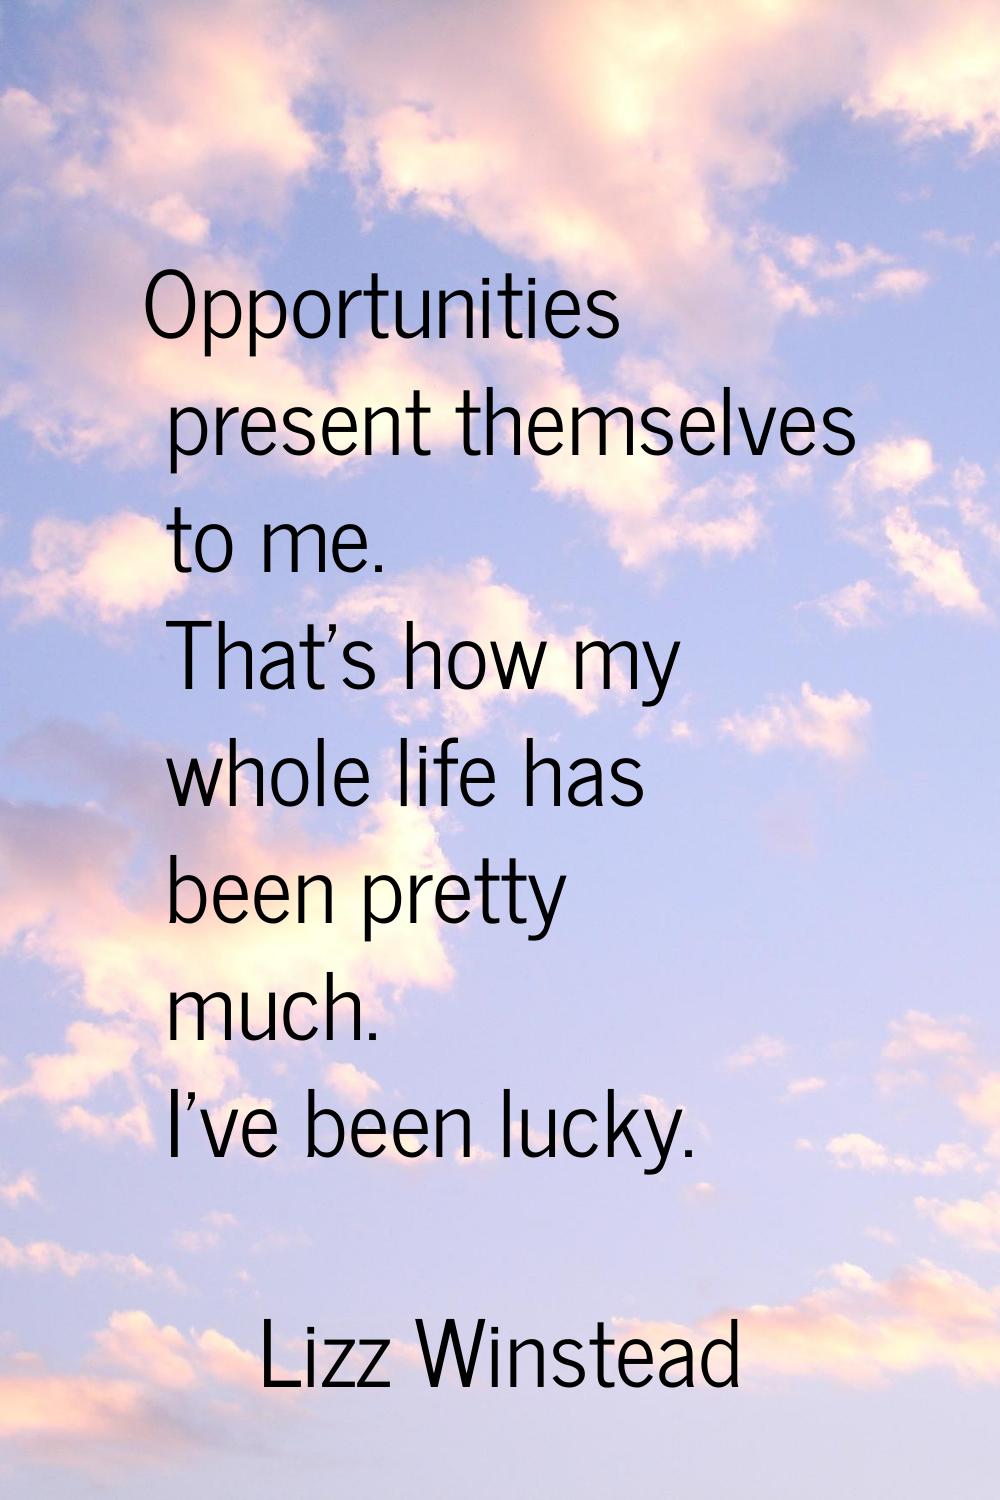 Opportunities present themselves to me. That's how my whole life has been pretty much. I've been lu